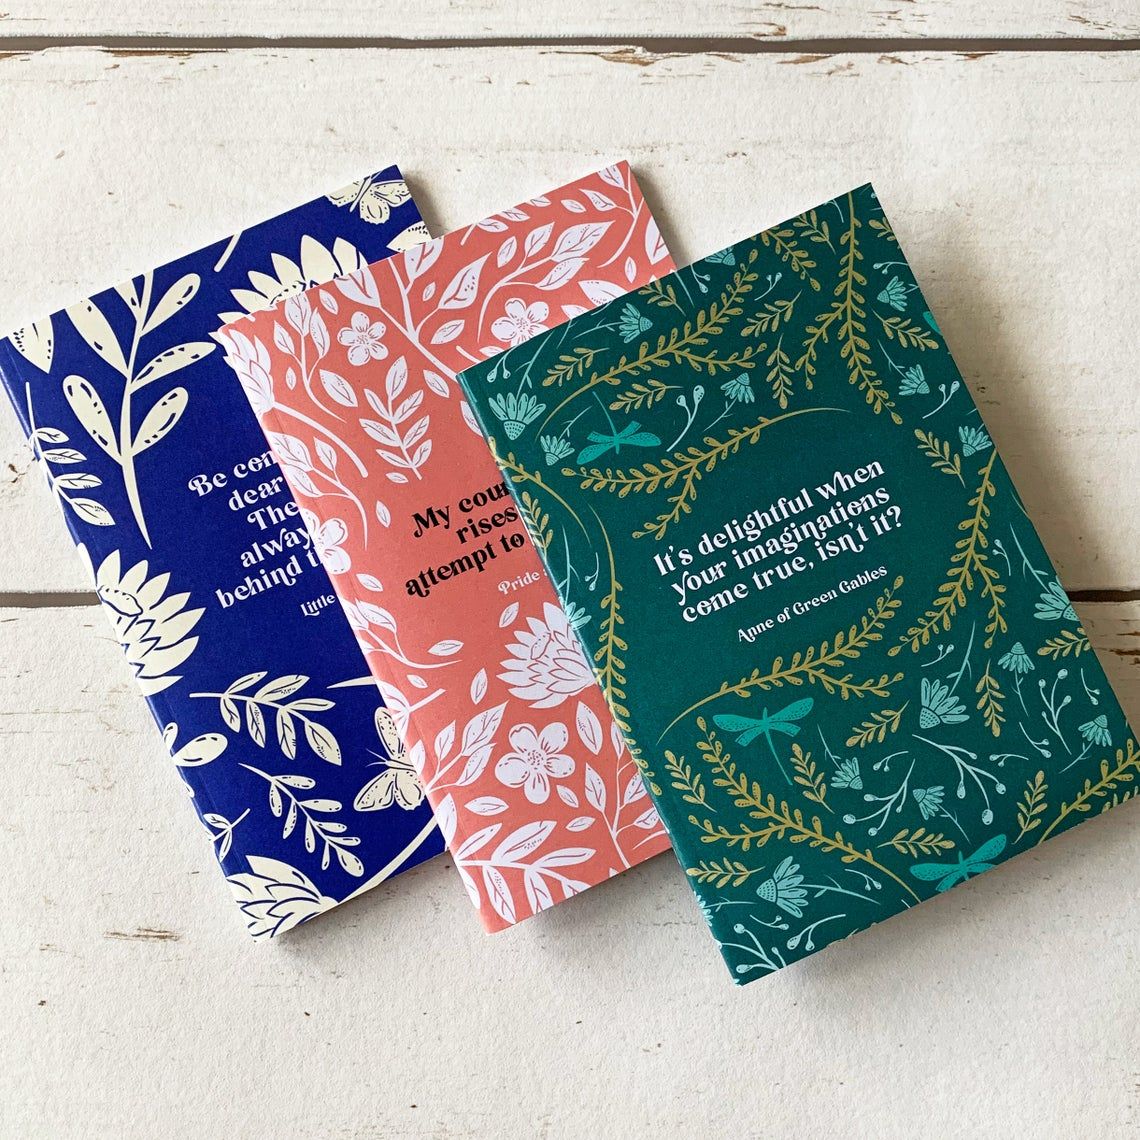 women of literature notebooks, colored blue, red, and green, with quotes from classic heroines